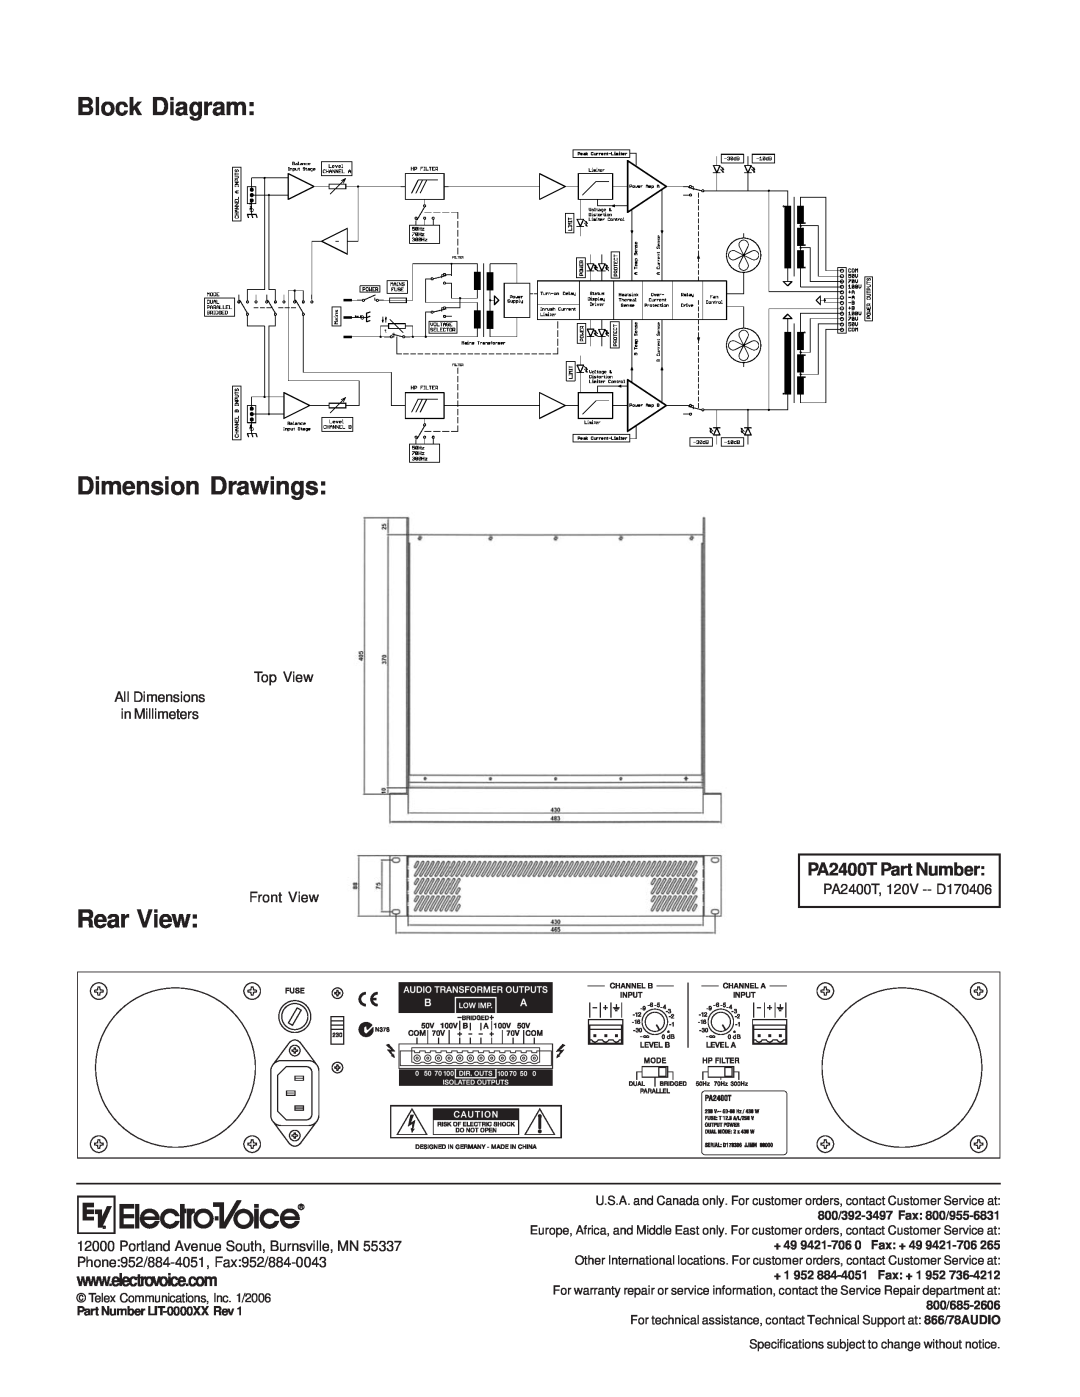 Electro-Voice Block Diagram Dimension Drawings, Rear View, PA2400T Part Number, Telex Communications, Inc. 1/2006 